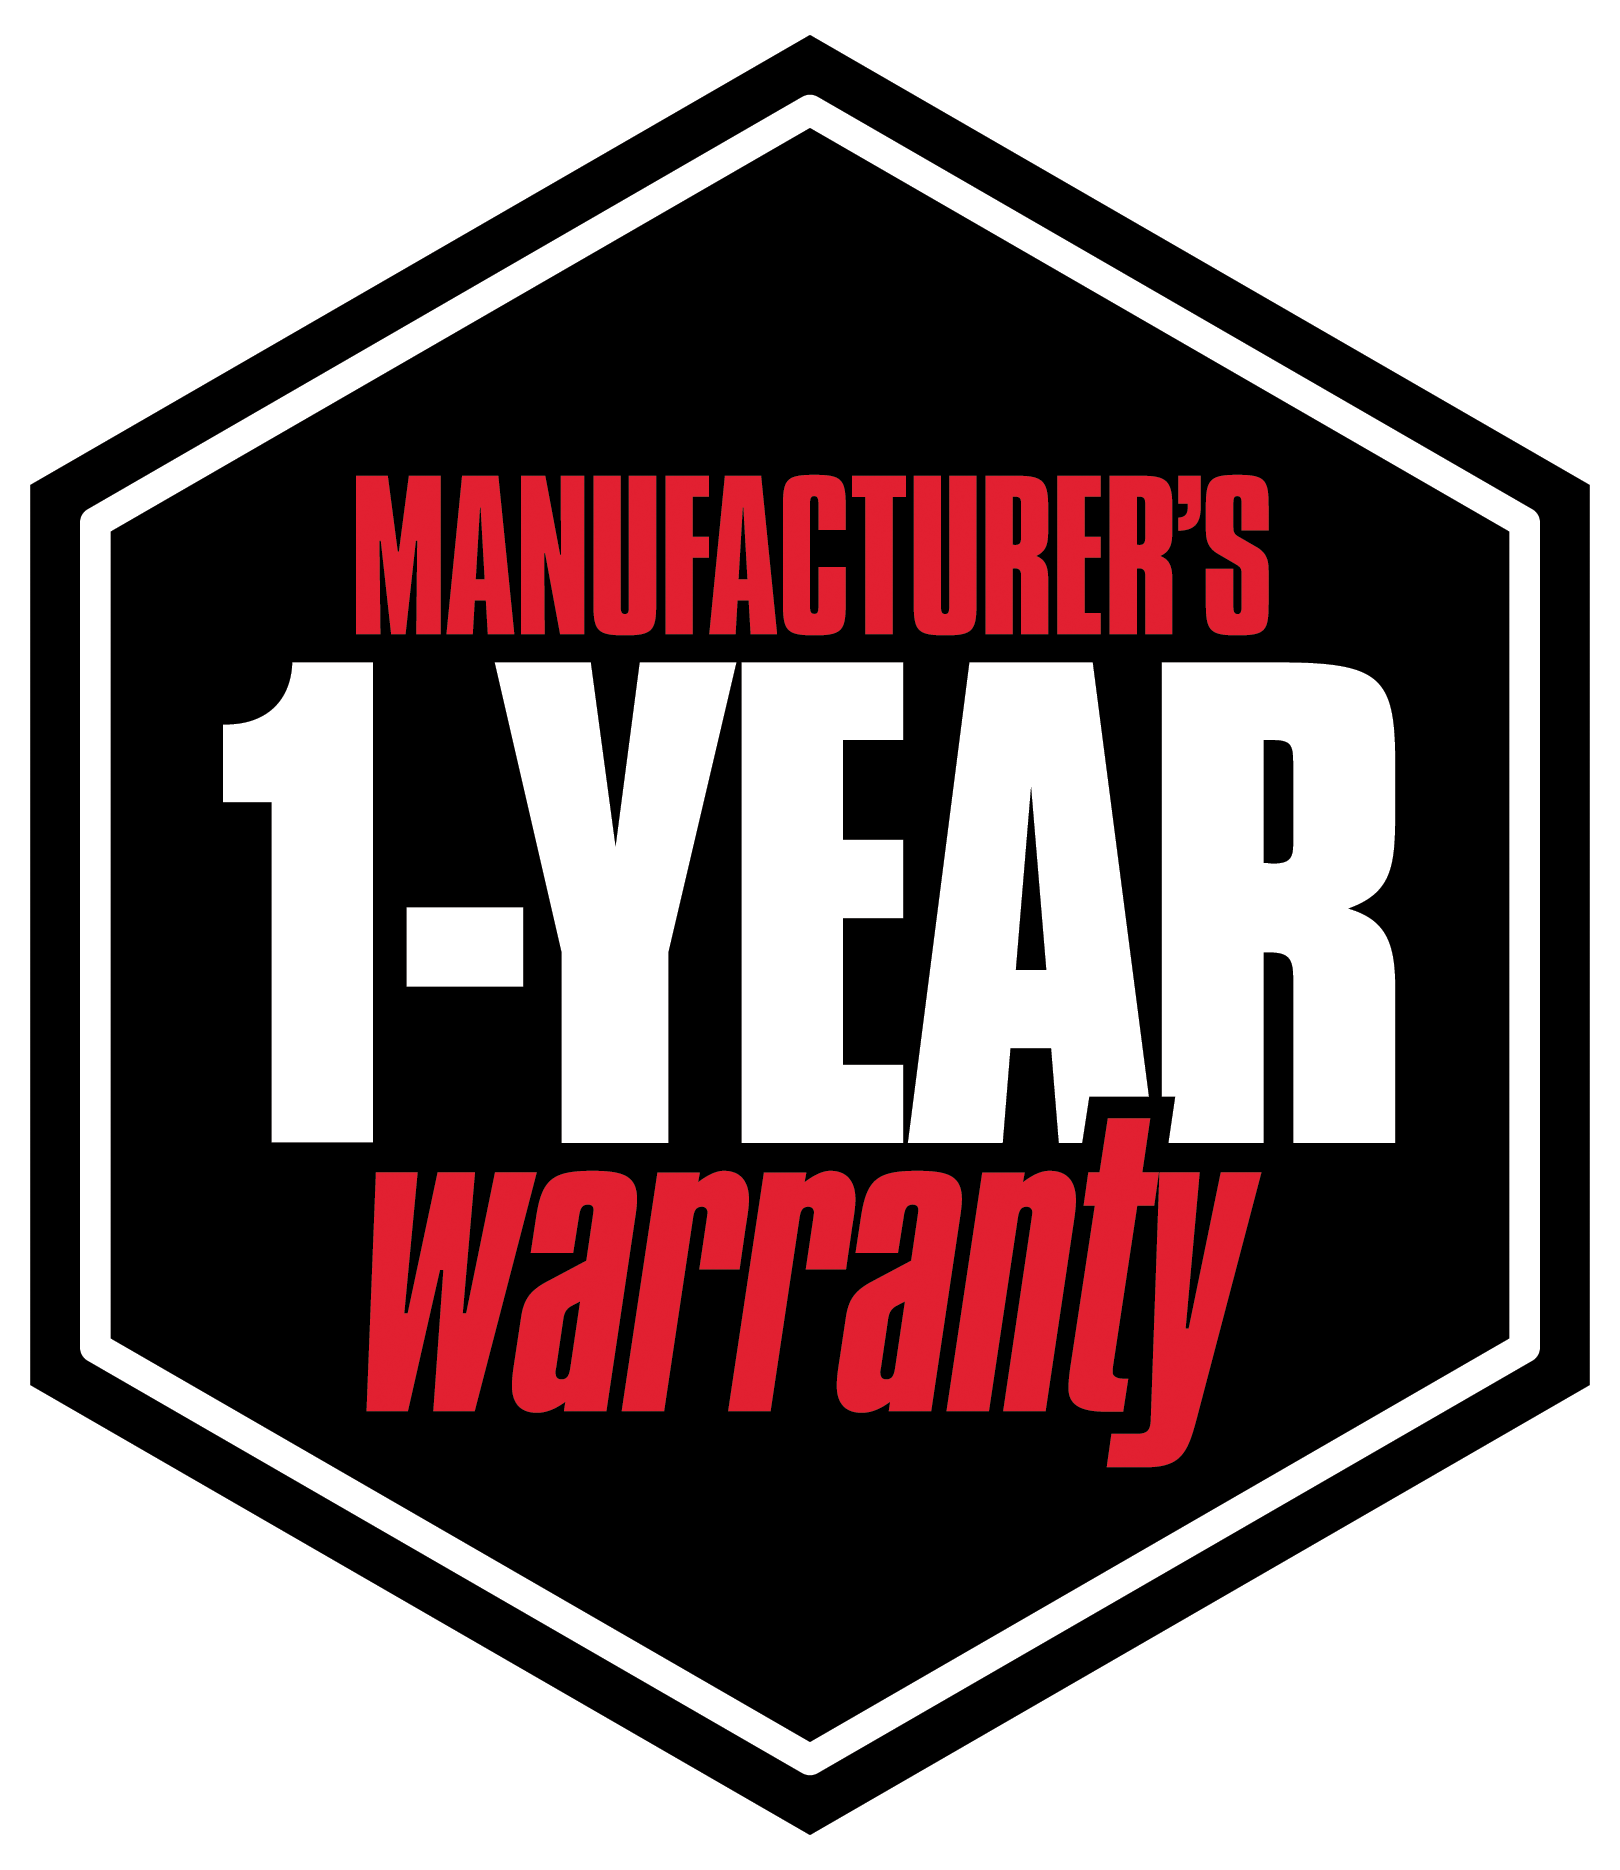 A logo for a manufacturer 's 1 year warranty.